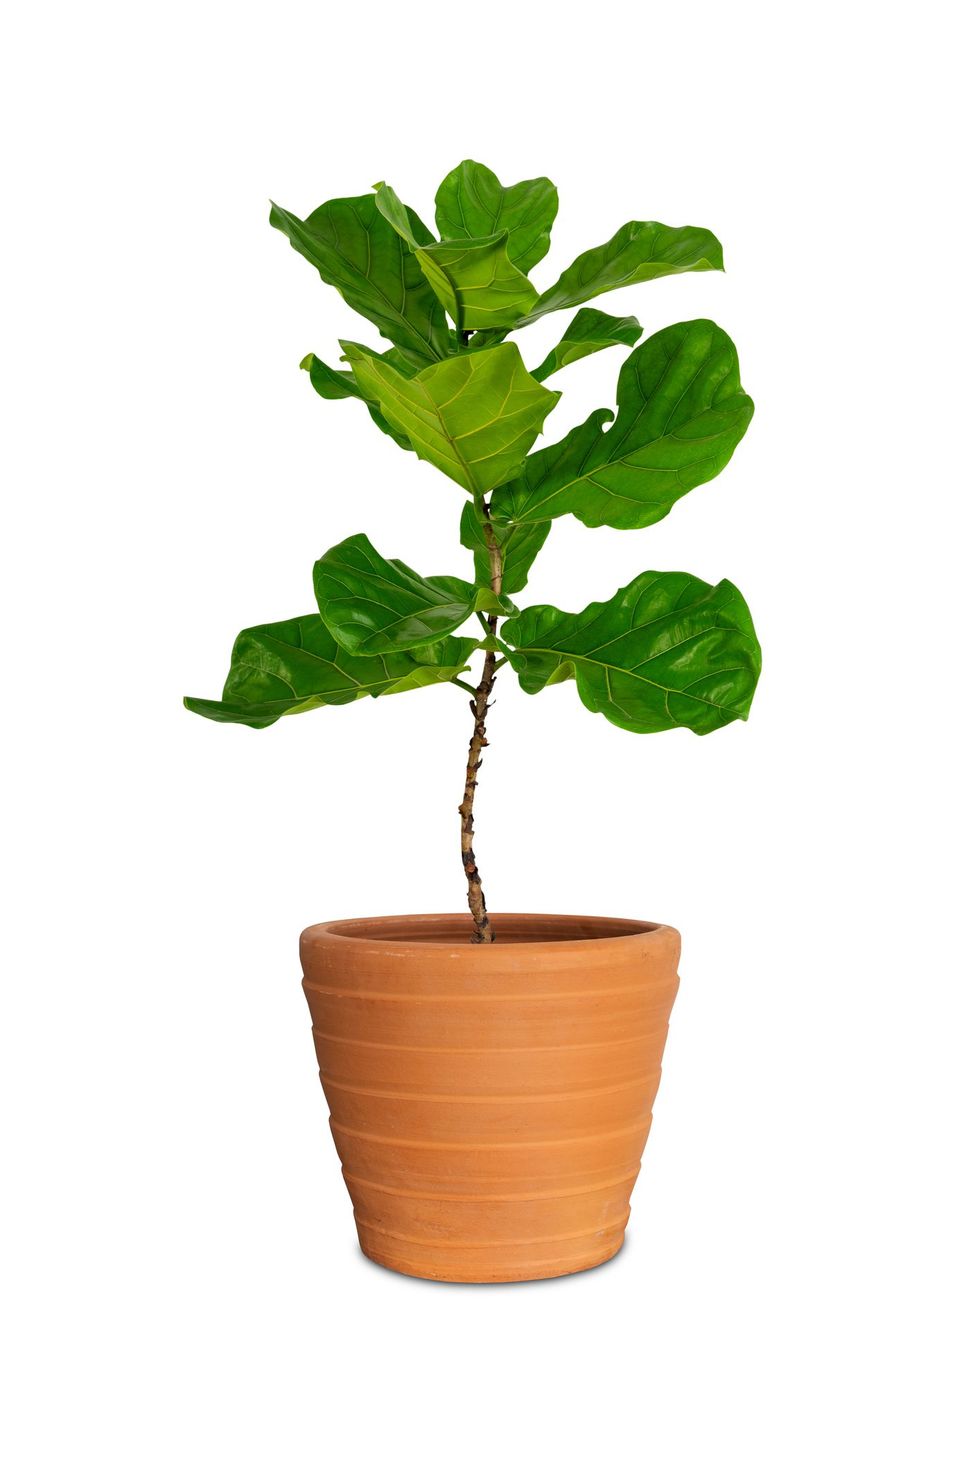 Get the Look: Fiddle Leaf Fig Tree